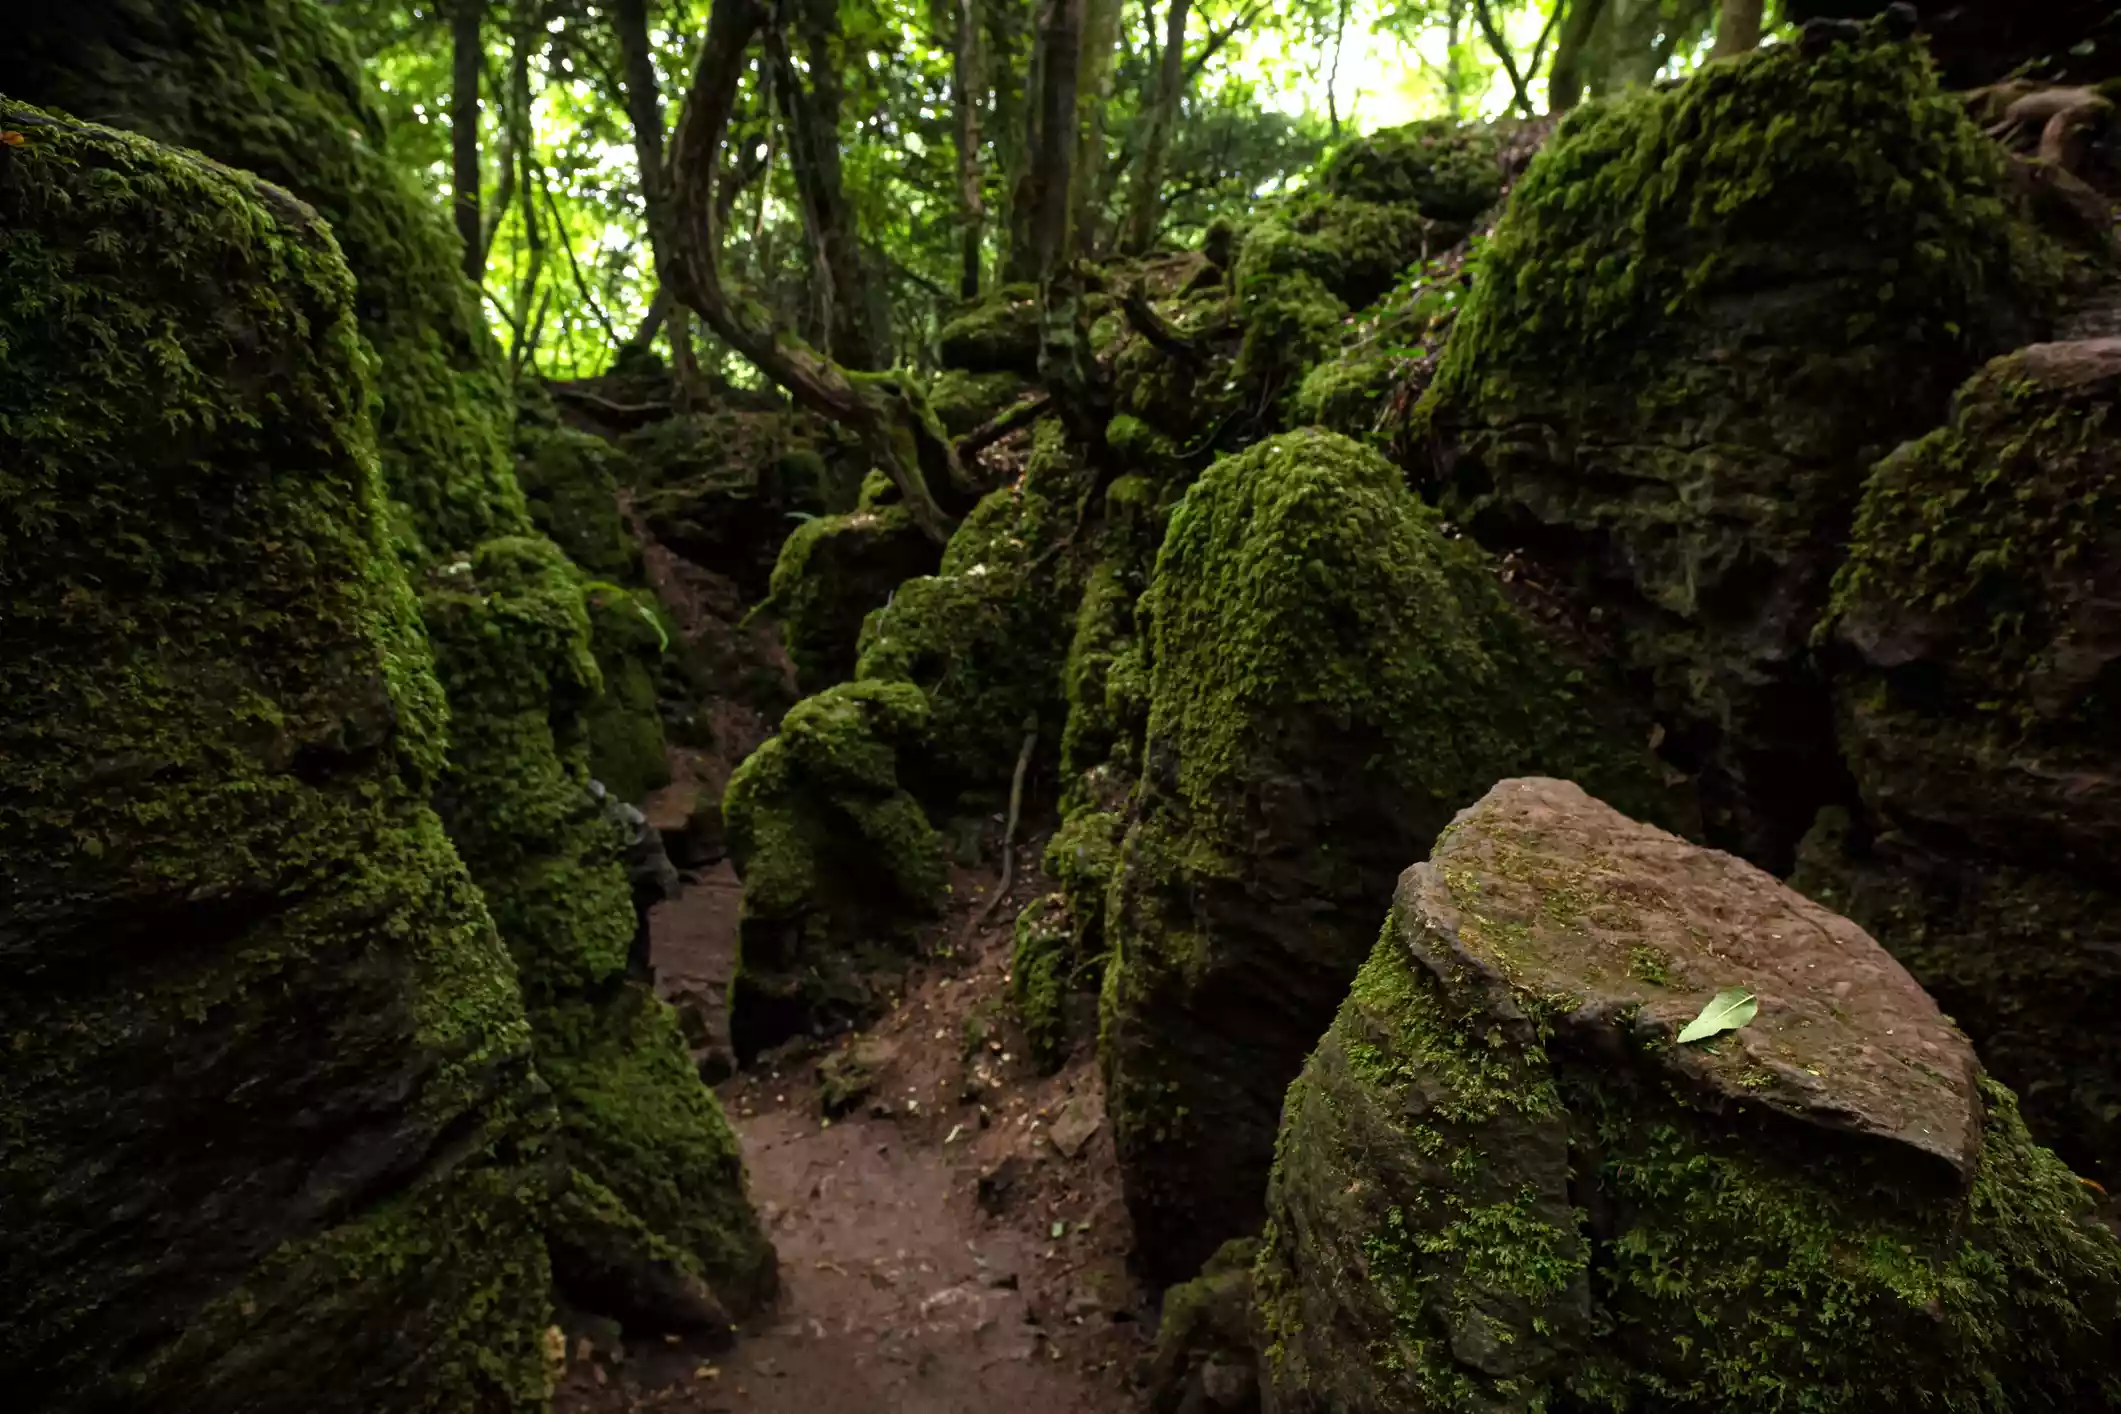 The moss-covered rocks of an ancient woodland 